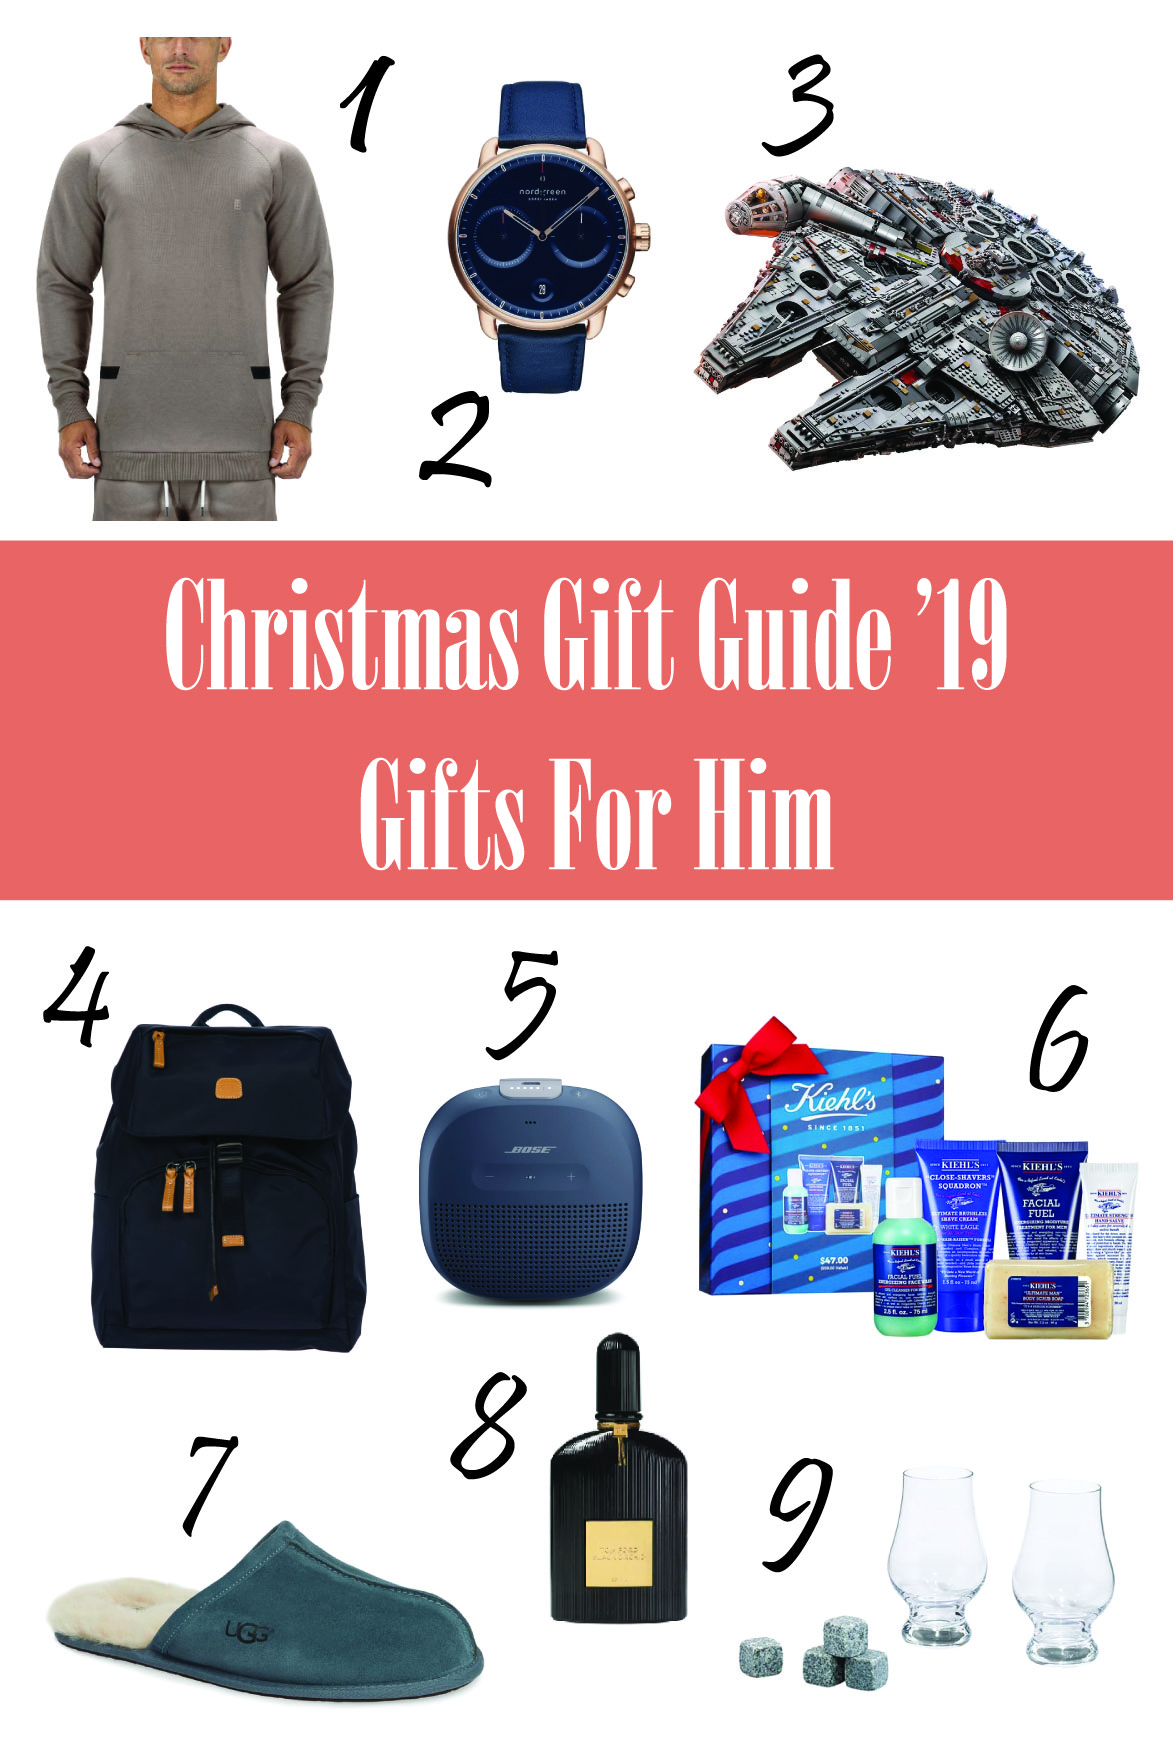 Christmas Gift Guide '19 For Him